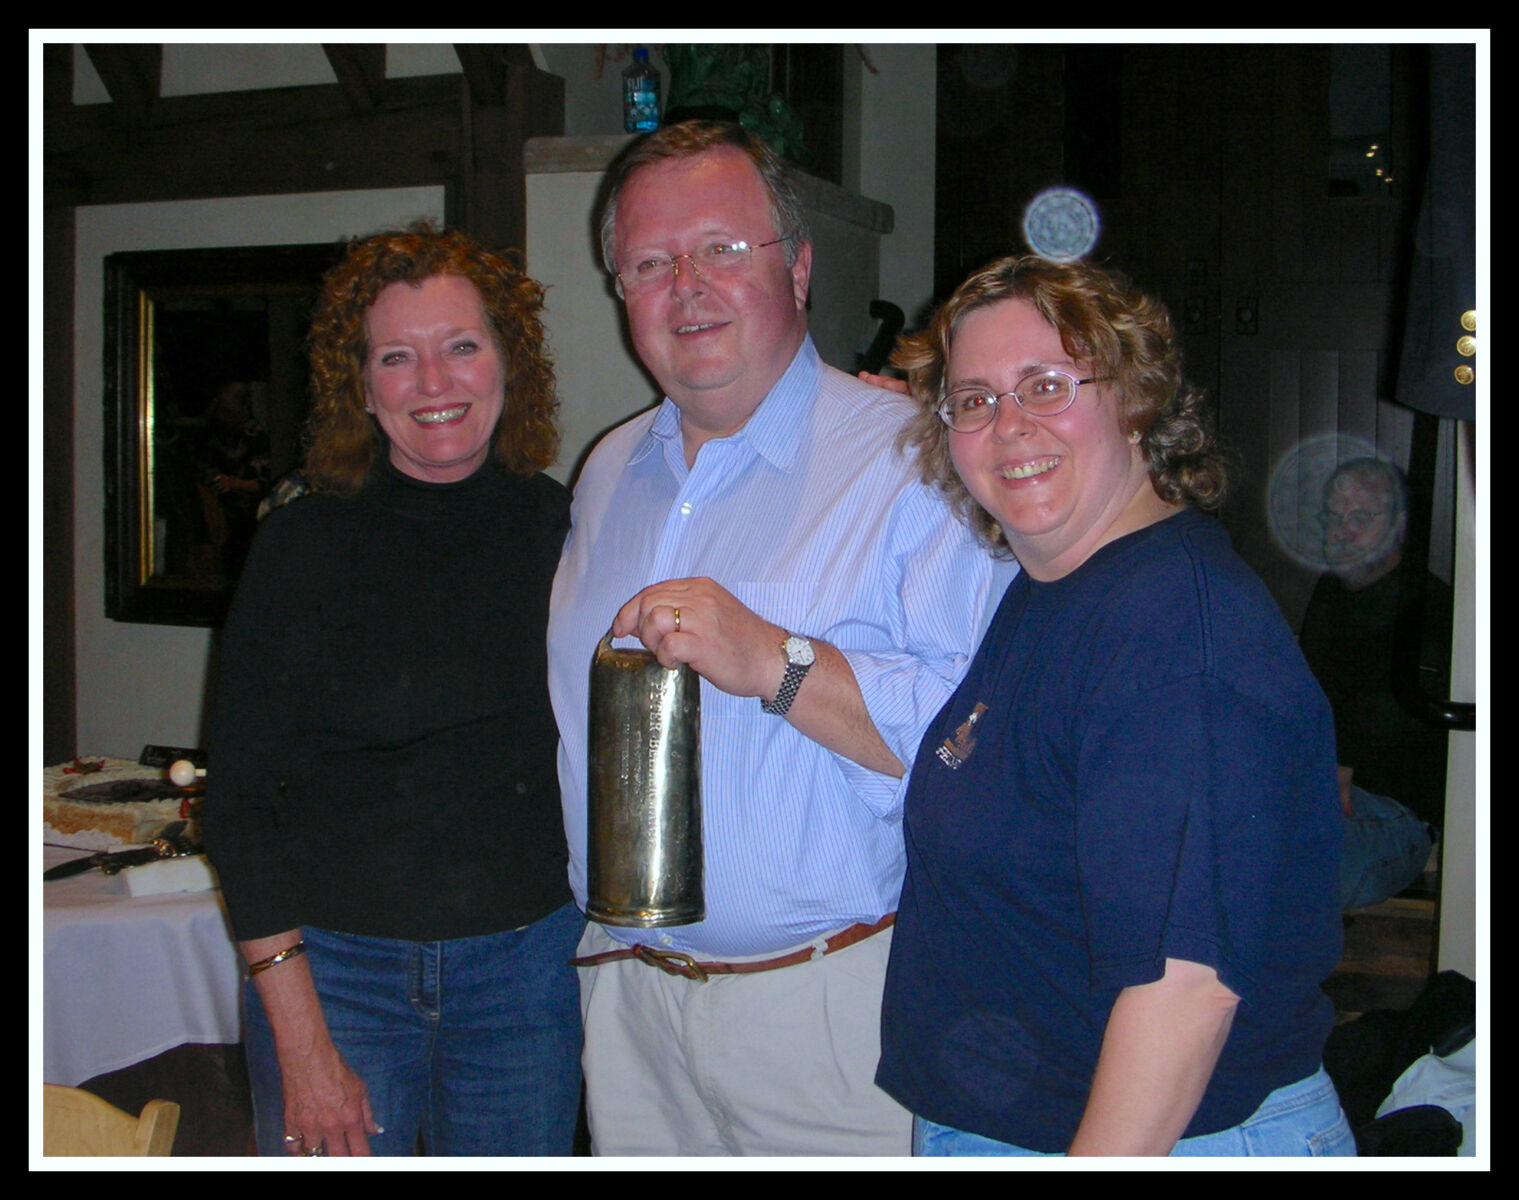 Three people stand indoors, smiling at the camera. The person in the middle holds a shiny metallic object. A table is visible in the background.